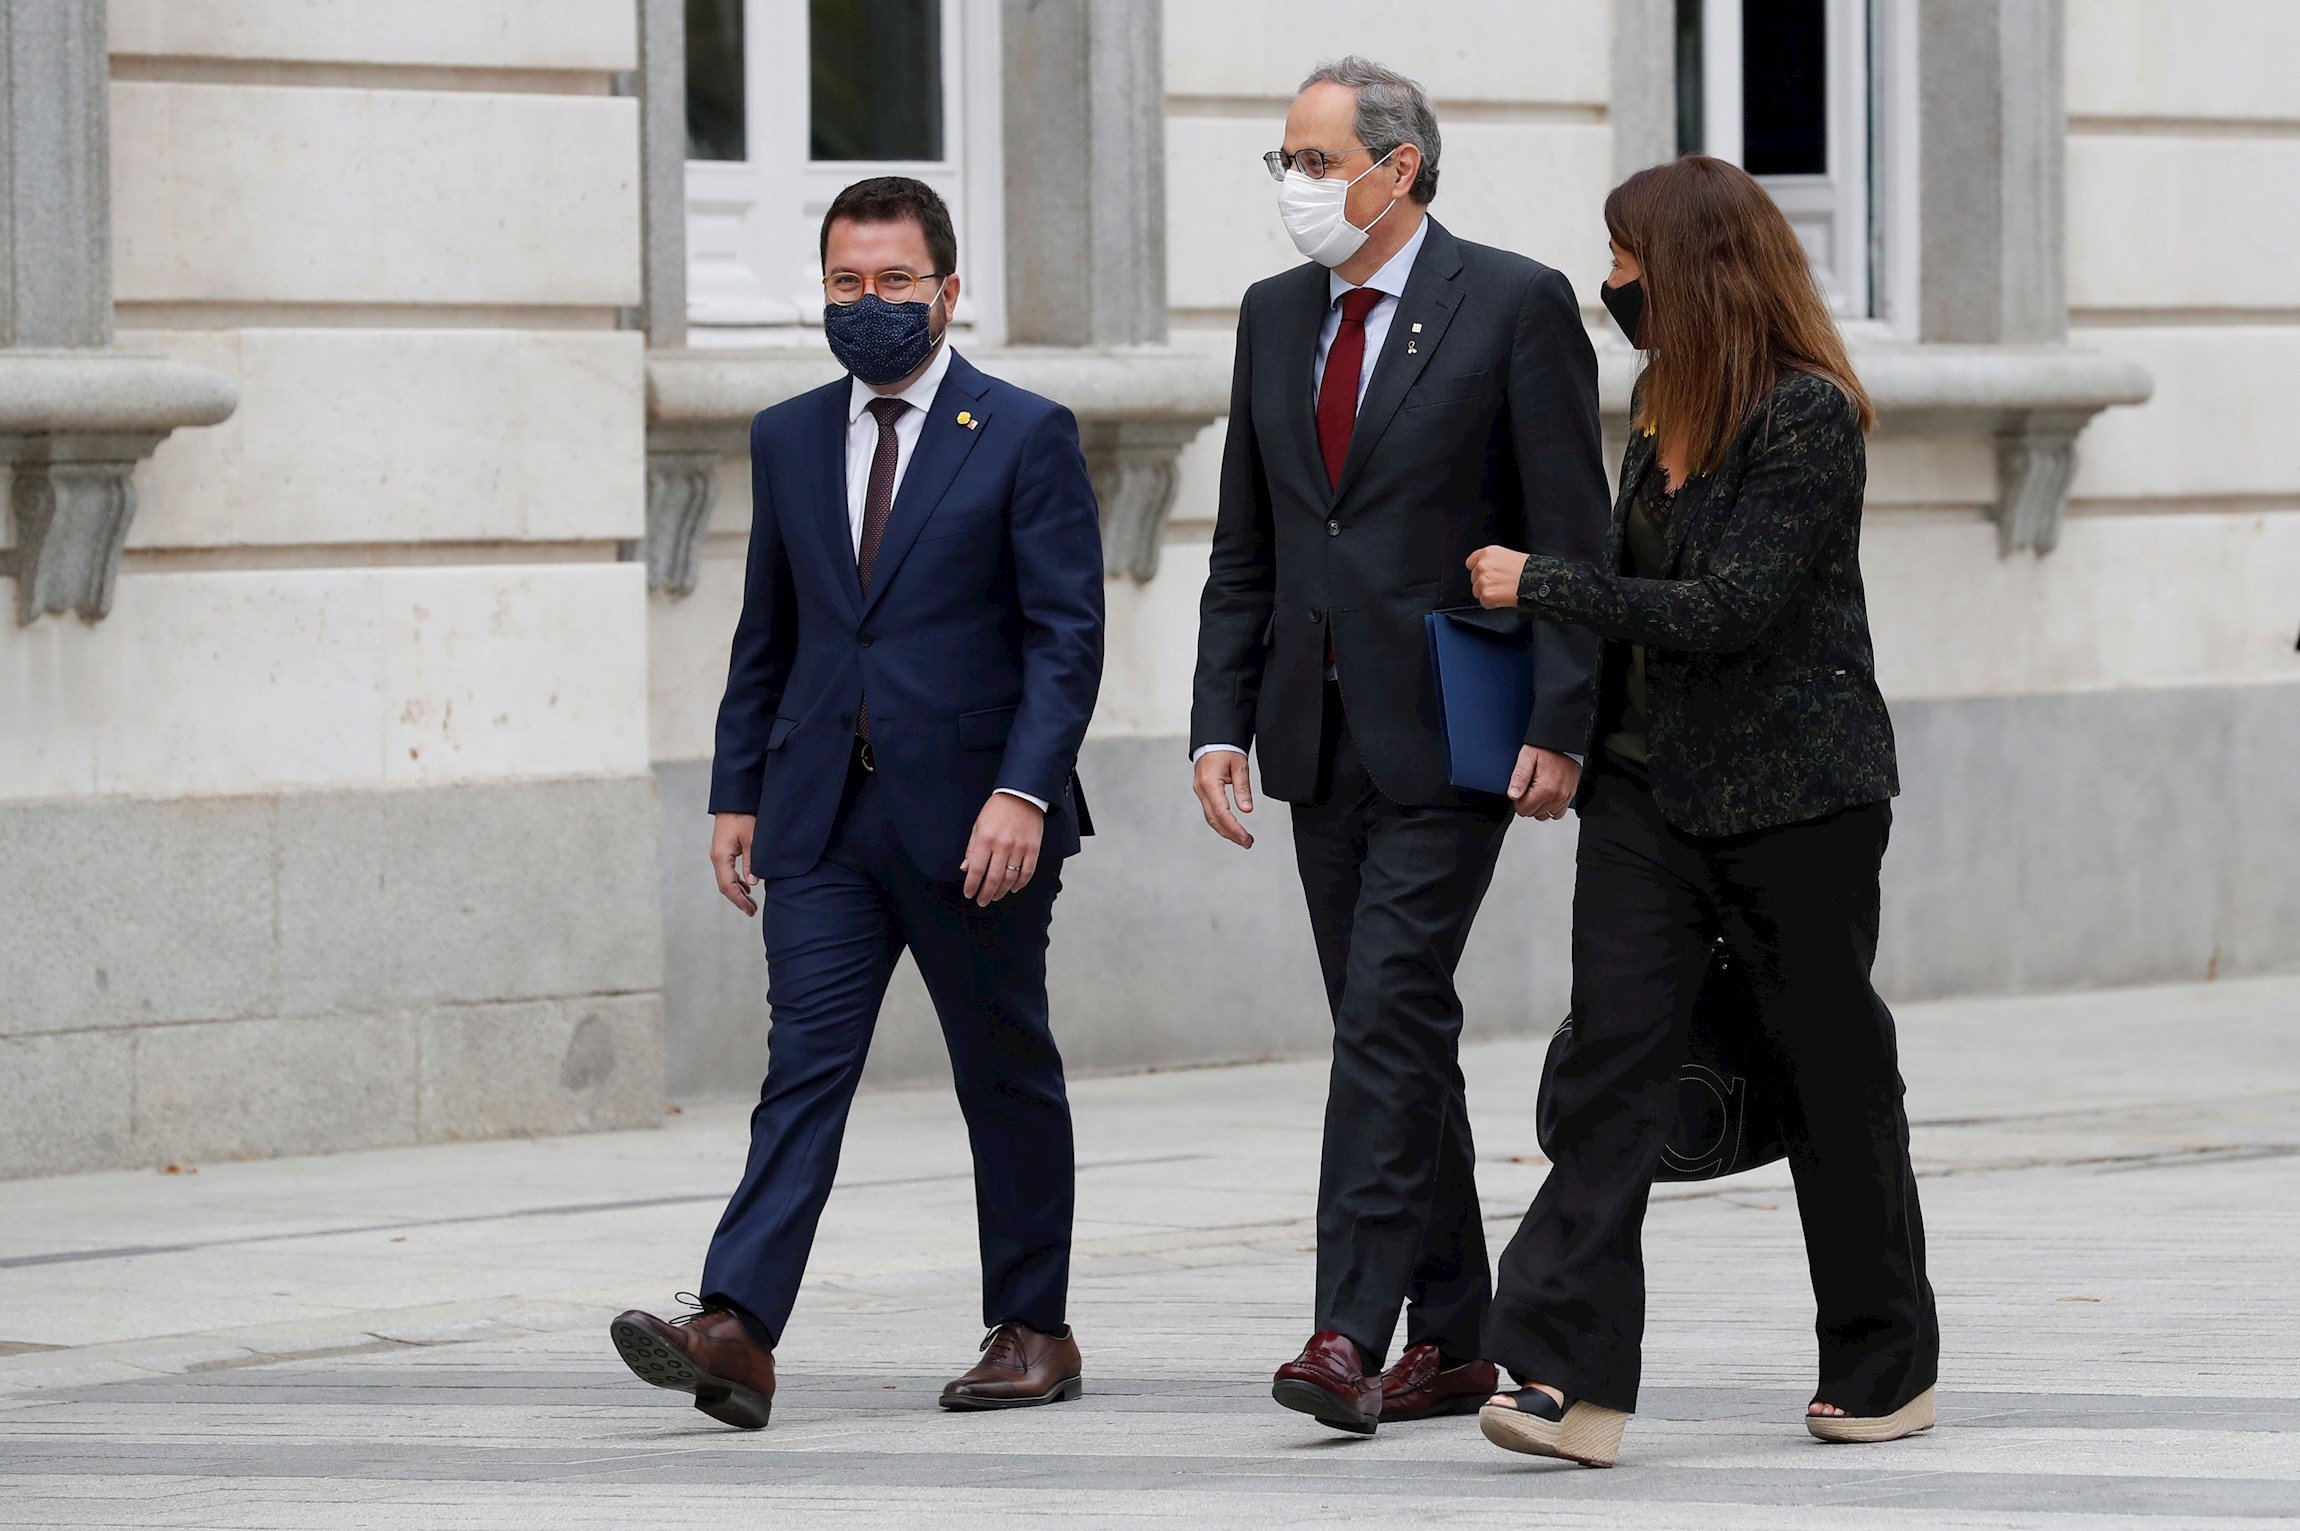 JxCat asserts its position if Quim Torra is stripped of Catalan presidency